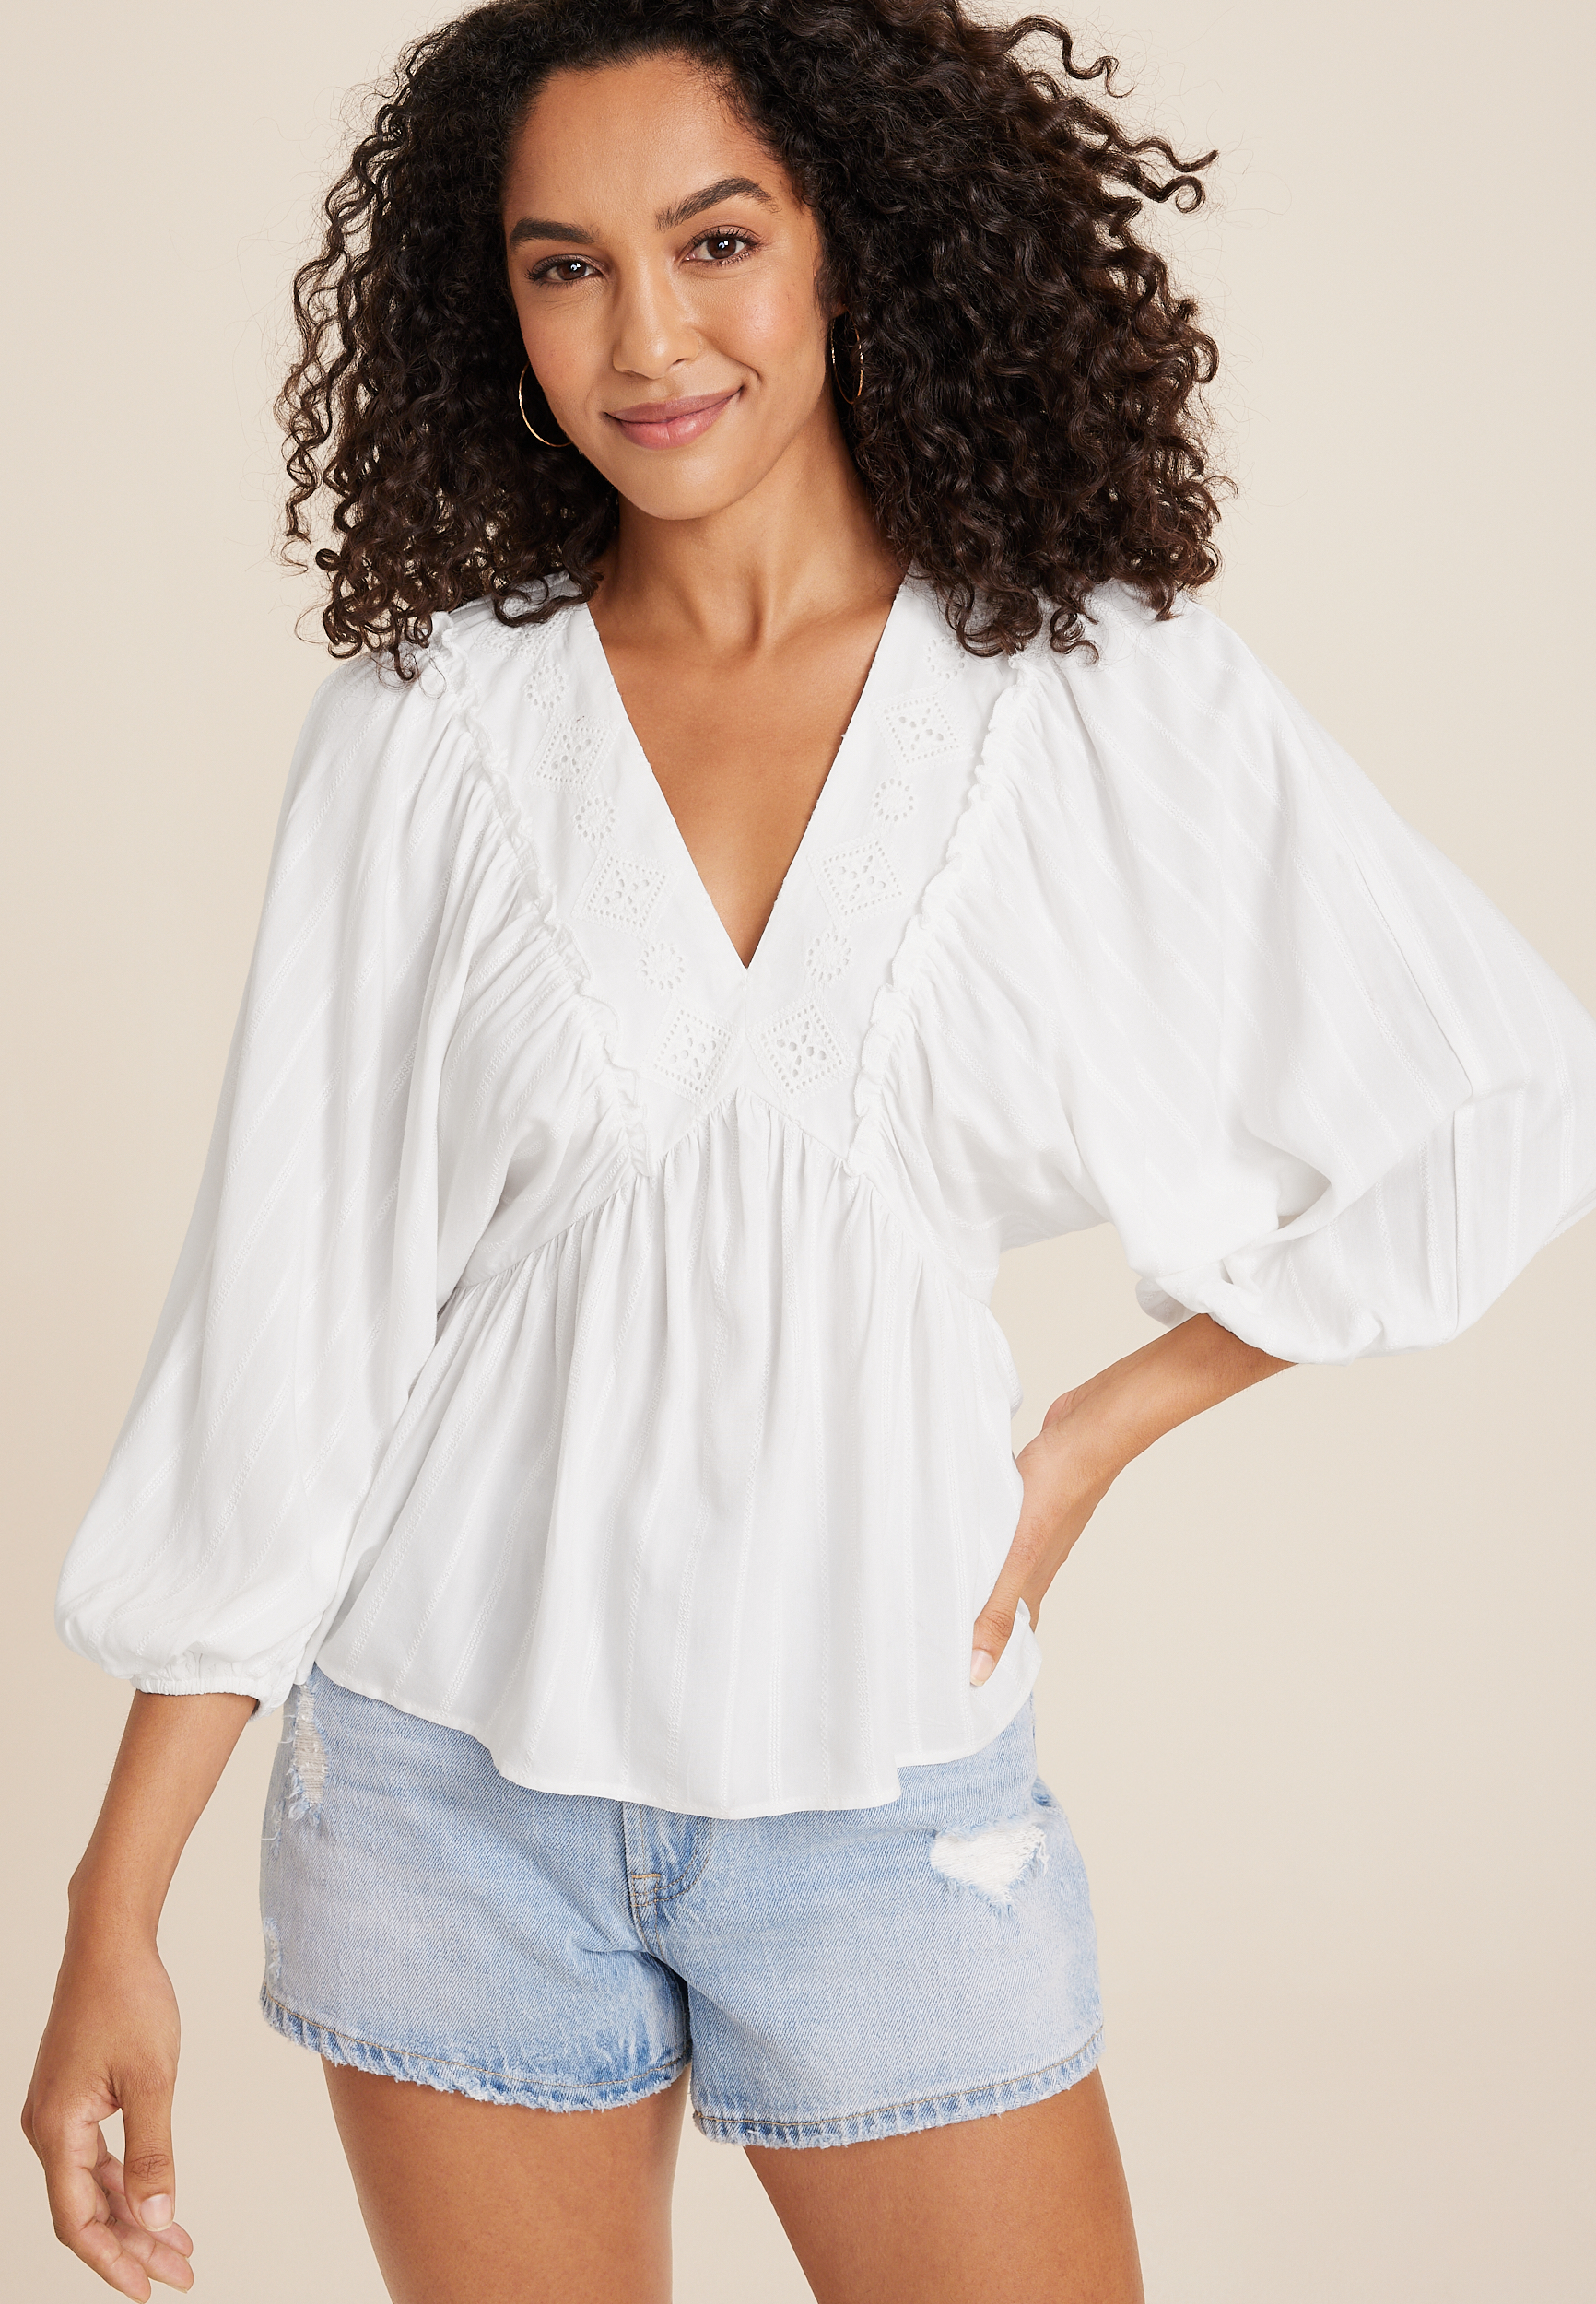 Shirts Floral, | Flowy, Peasant Women\'s & Blouses: More & maurices